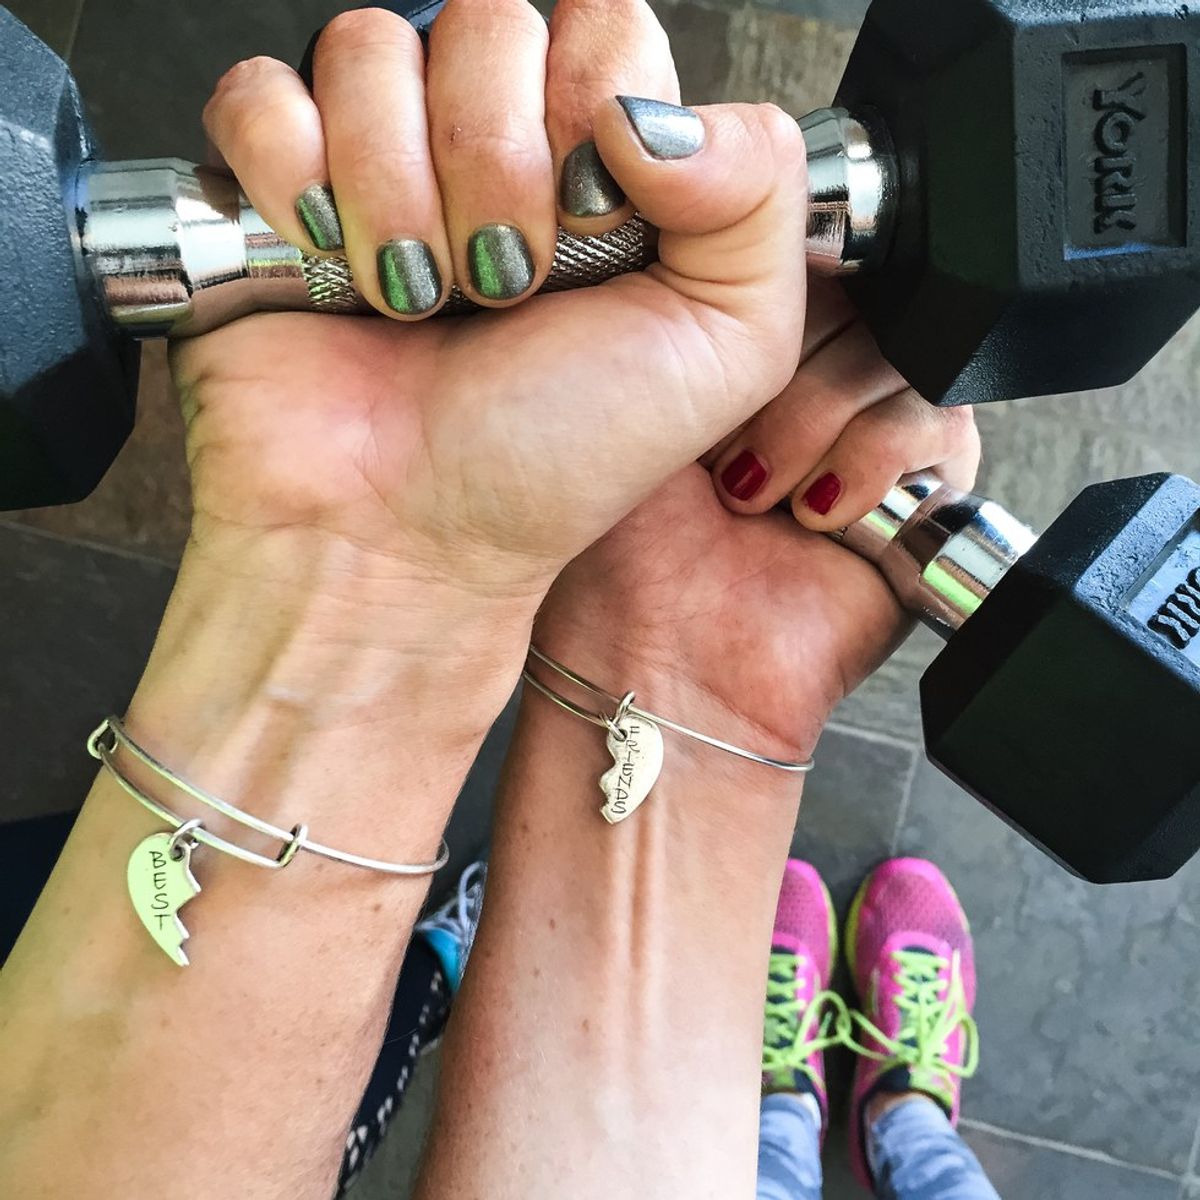 6 Reasons Working Out With A Friend Is So Much Better